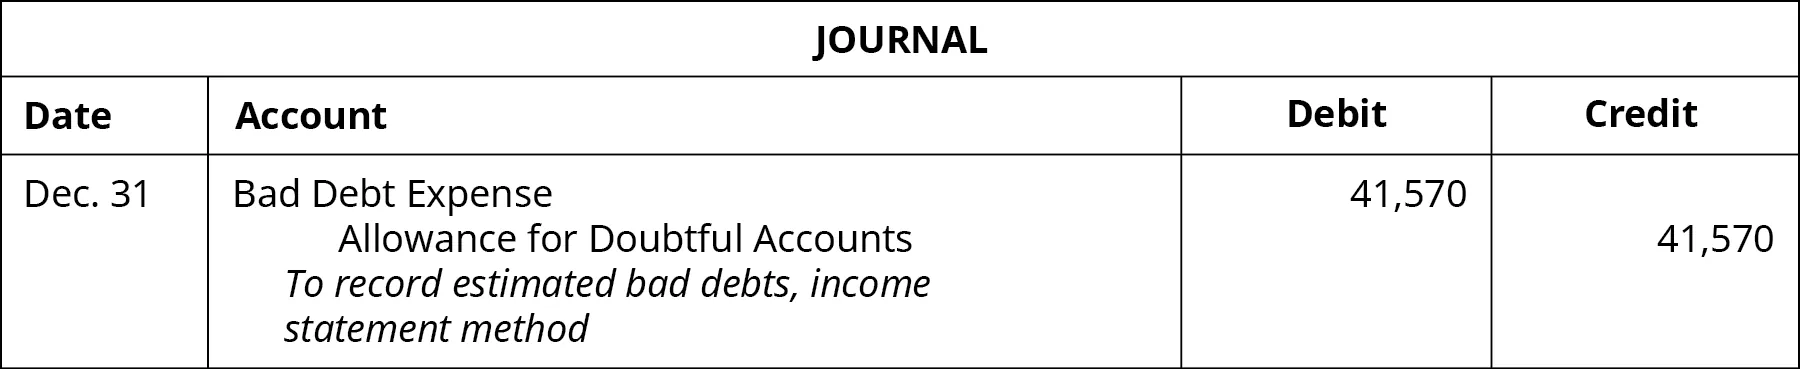 Journal entry: December 31 Debit Bad Debt Expense 41,570, credit Allowance for Doubtful Accounts 41,570. Explanation: “To record estimated bad debts, income statement method.”